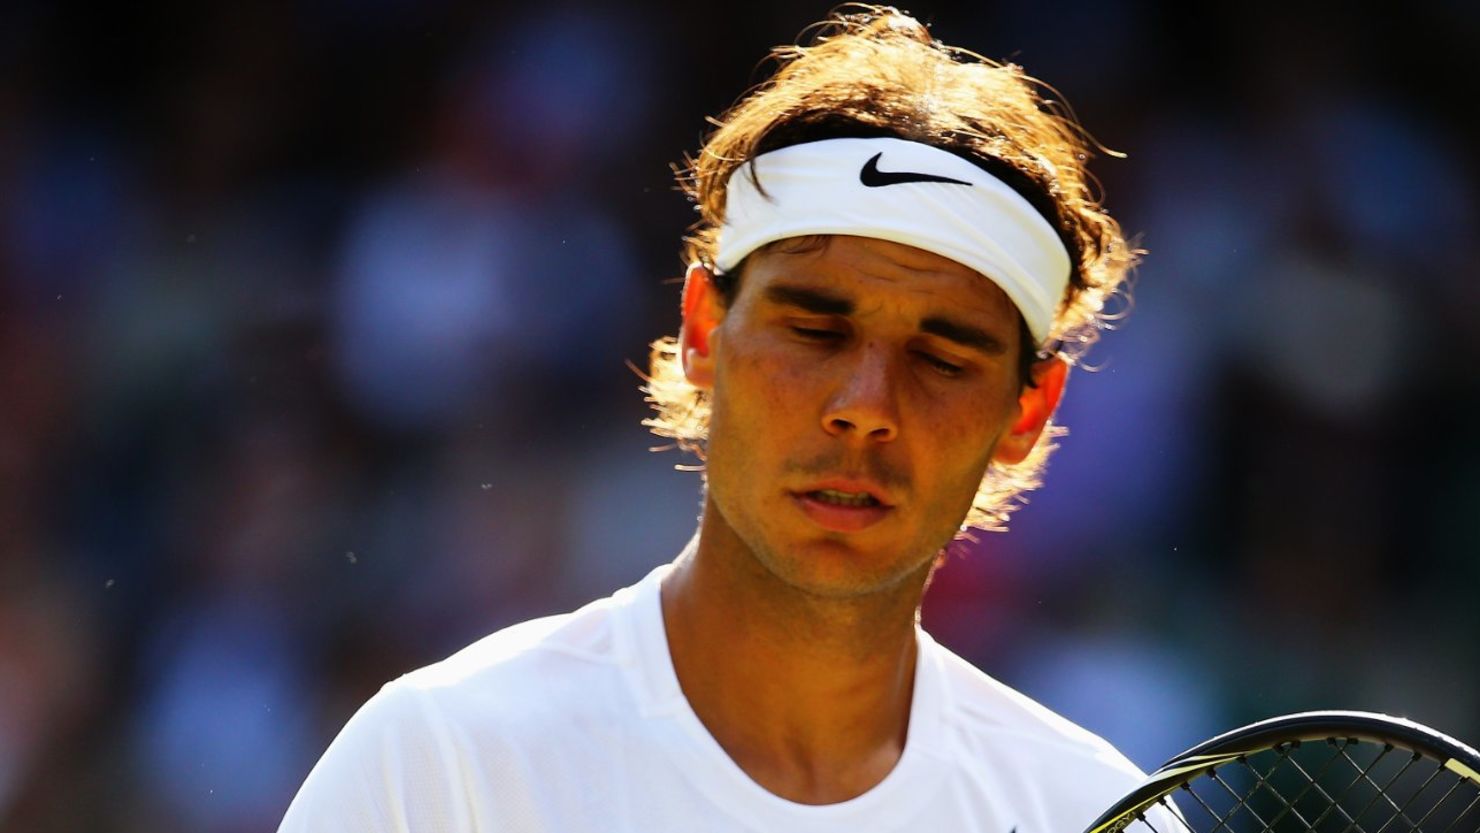 Rafael Nadal missed the U.S. Open in 2012 with a knee injury. This year, a wrist injury could rule him out. 